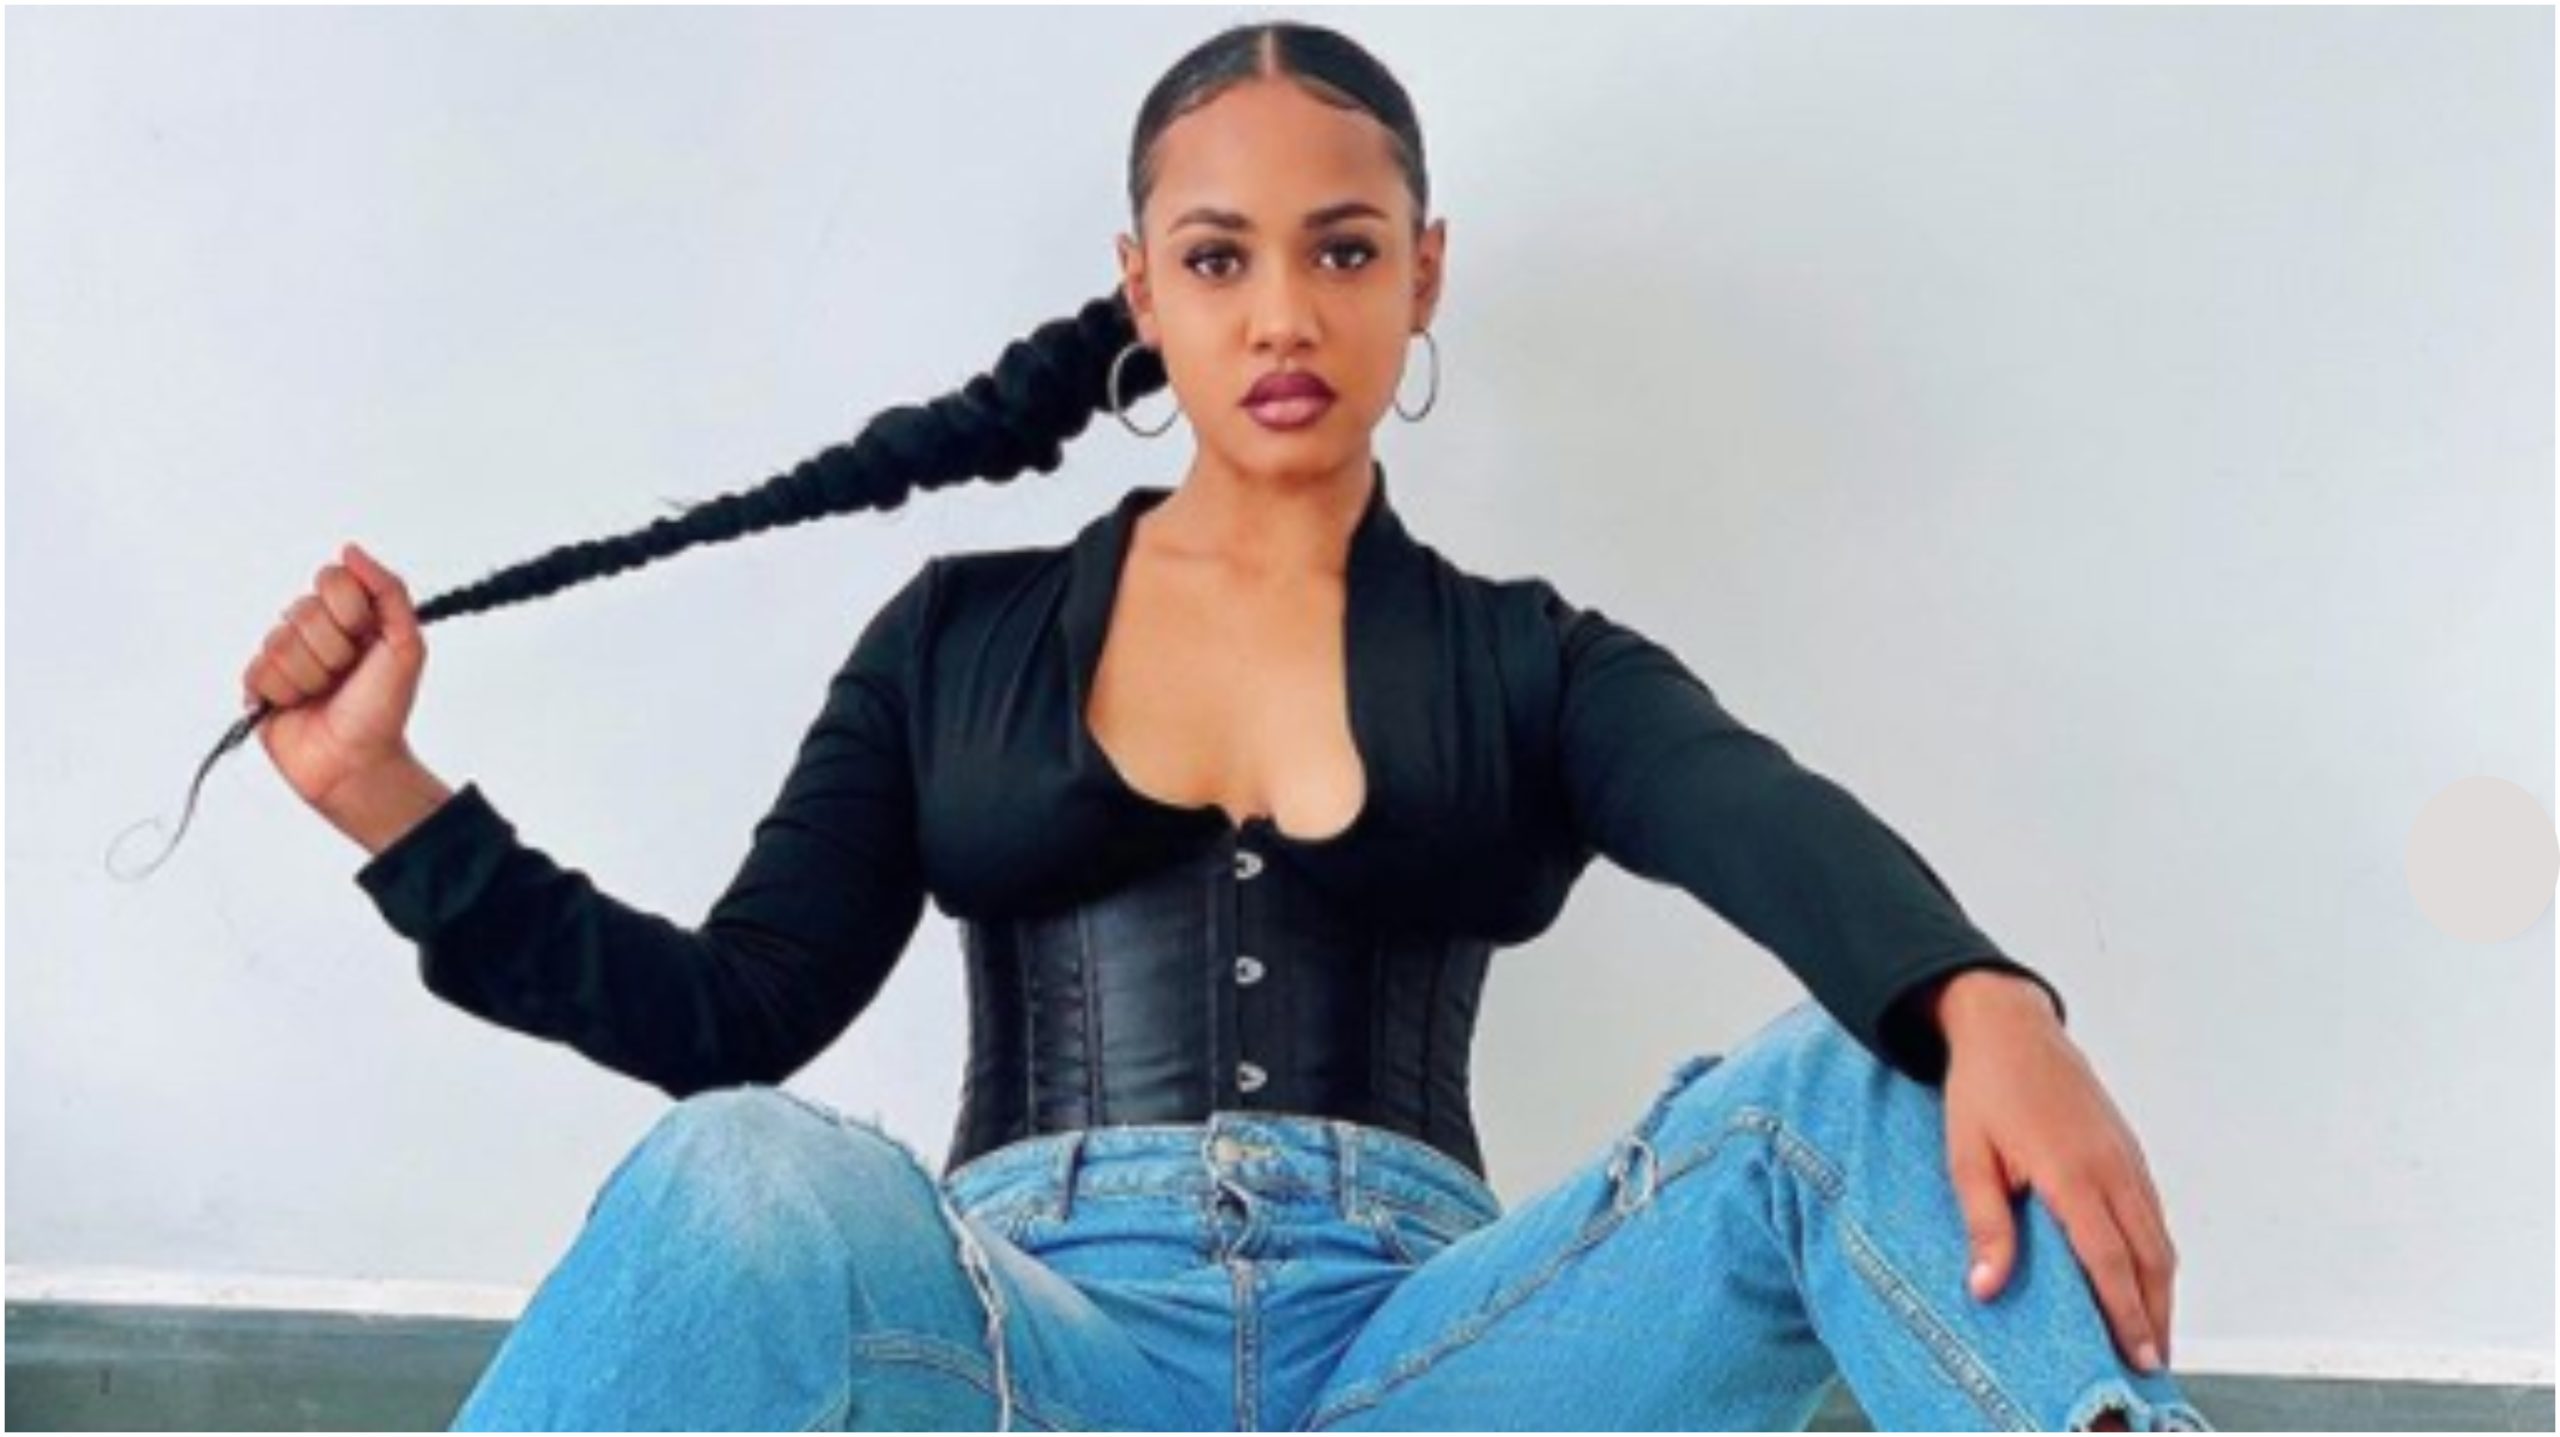 The new drama between Tanasha Donna and her manager Castro is very telling